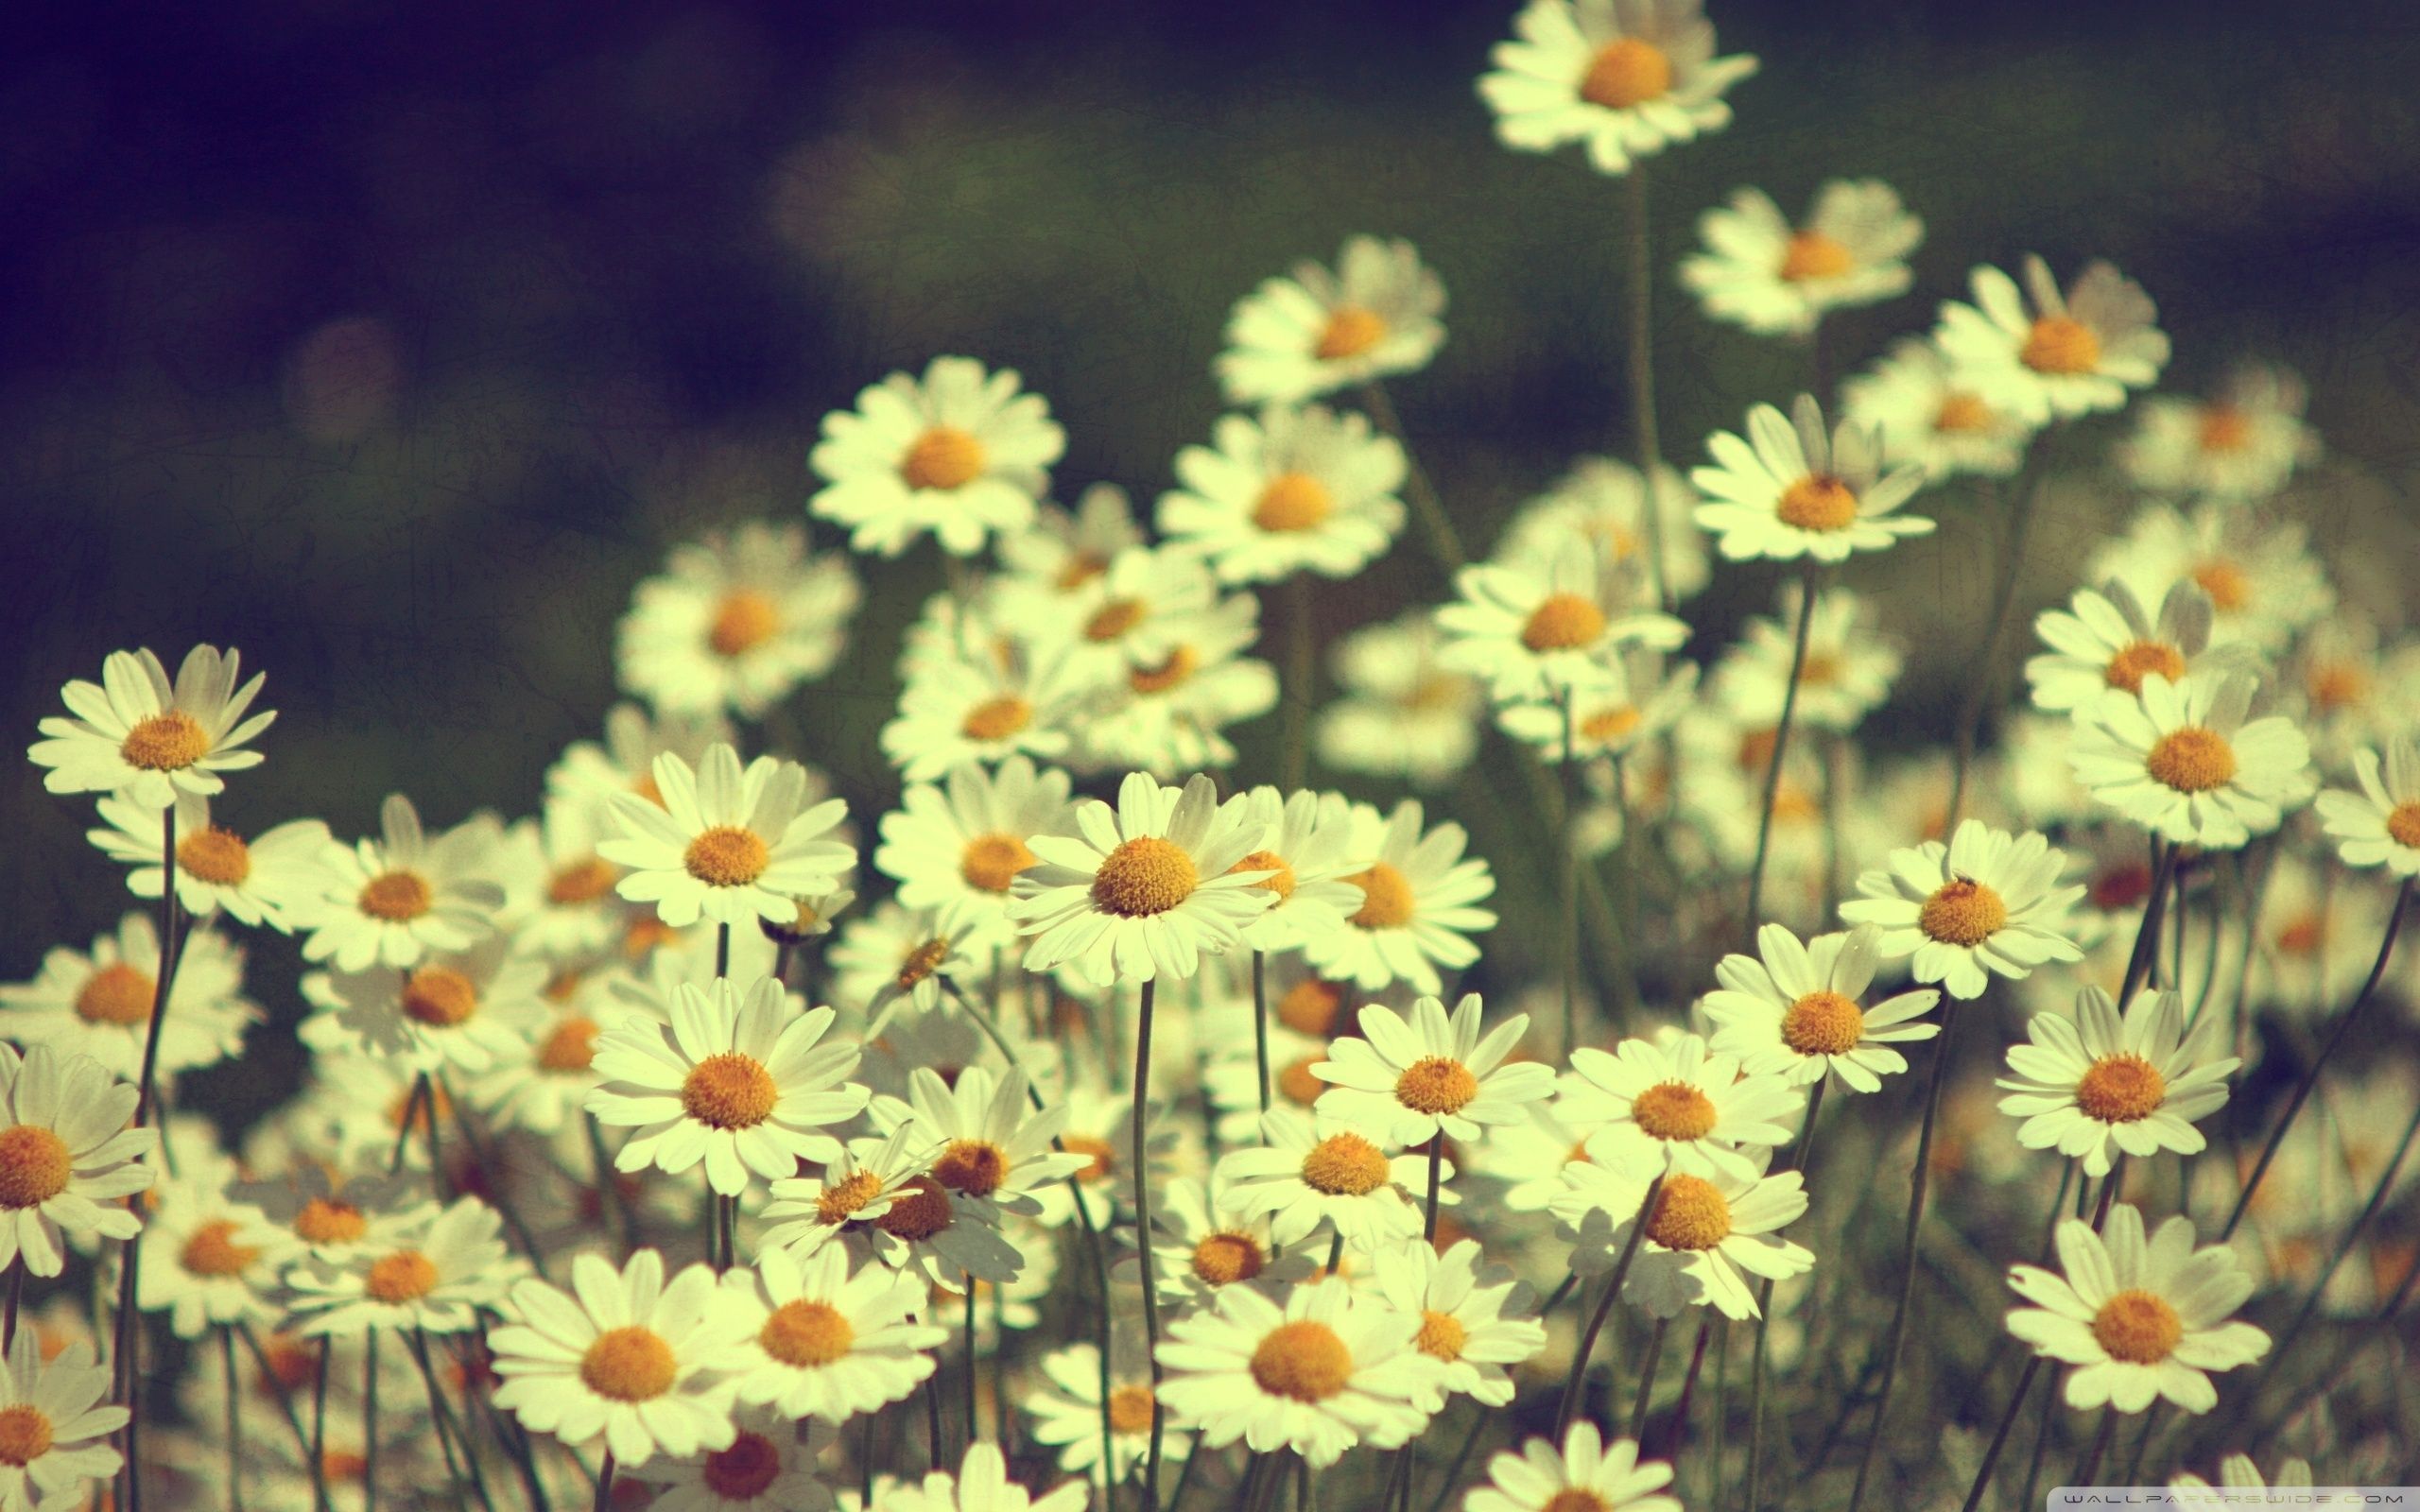 A field of white daisies with green grass - Daisy